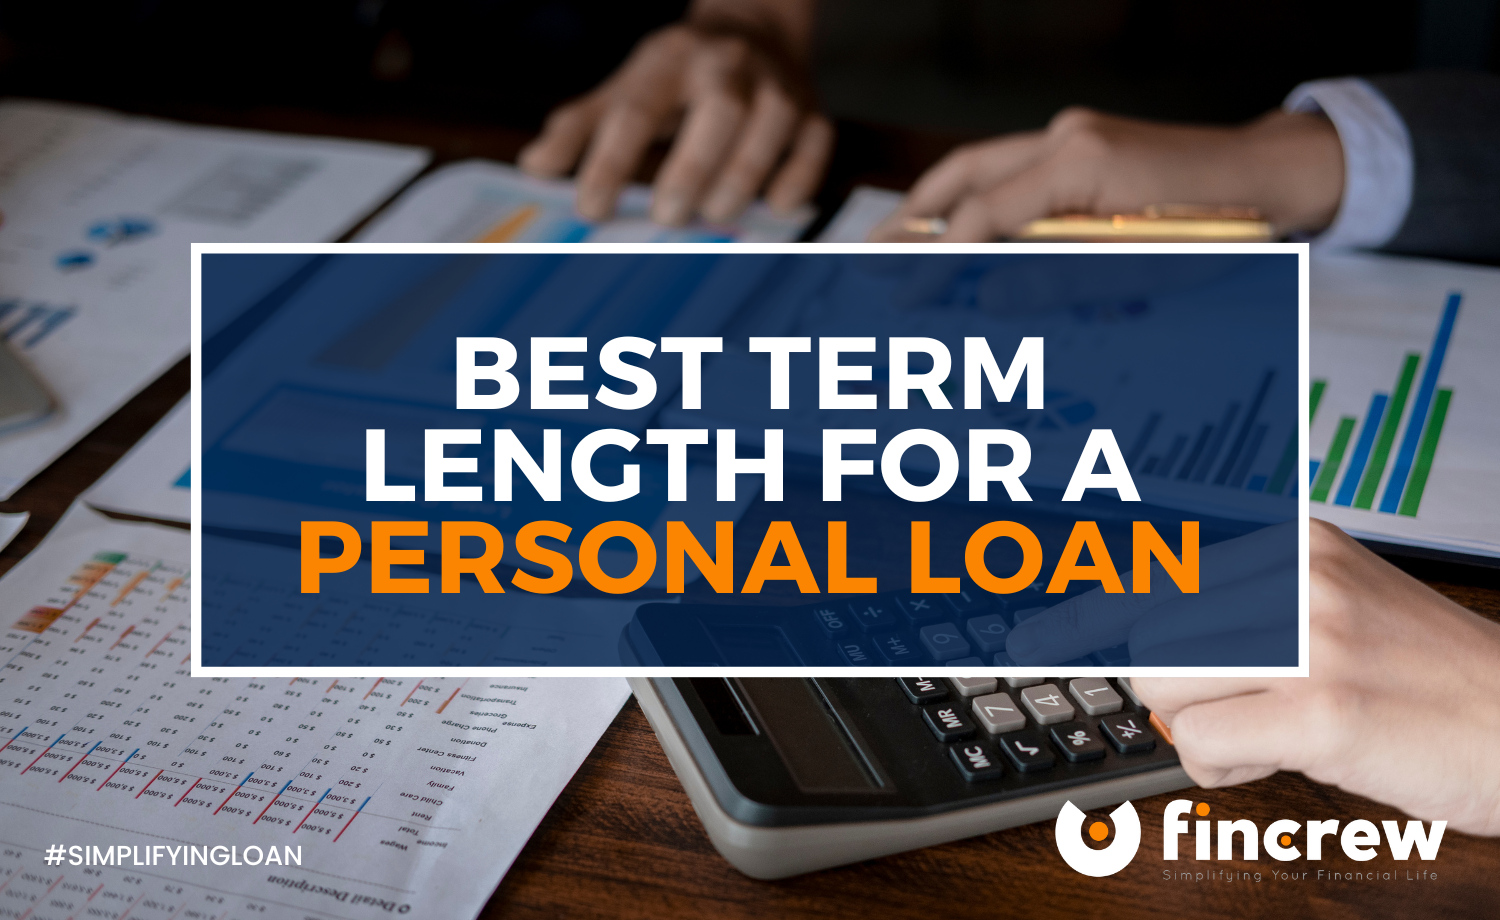 Best Term Length For a Personal Loan Blog Featured Image